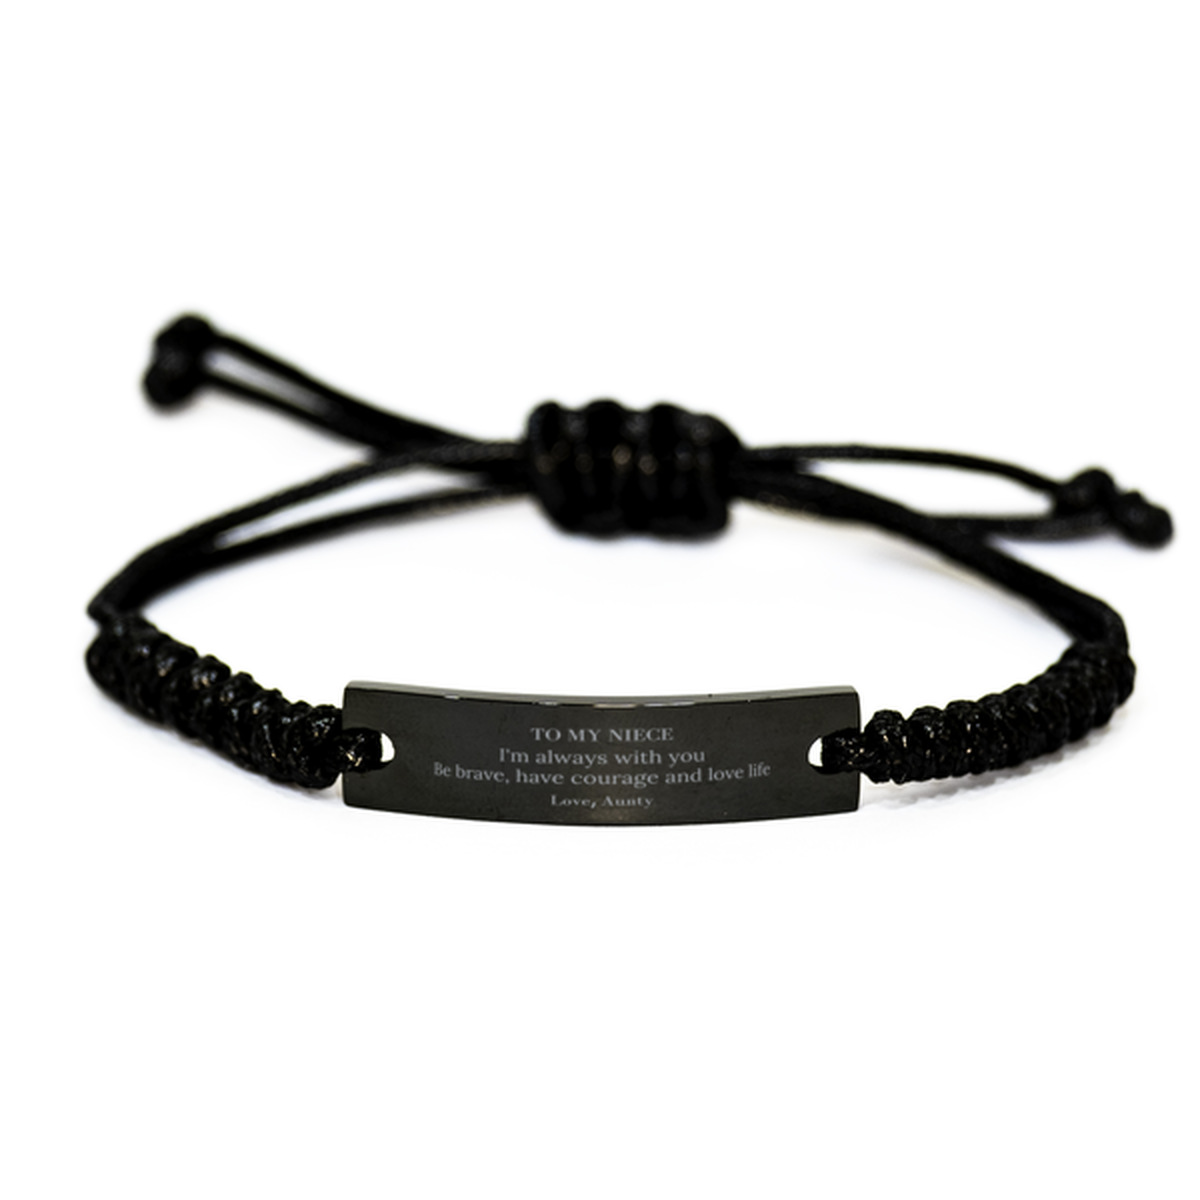 To My Niece Gifts from Aunty, Unique Black Rope Bracelet Inspirational Christmas Birthday Graduation Gifts for Niece I'm always with you. Be brave, have courage and love life. Love, Aunty